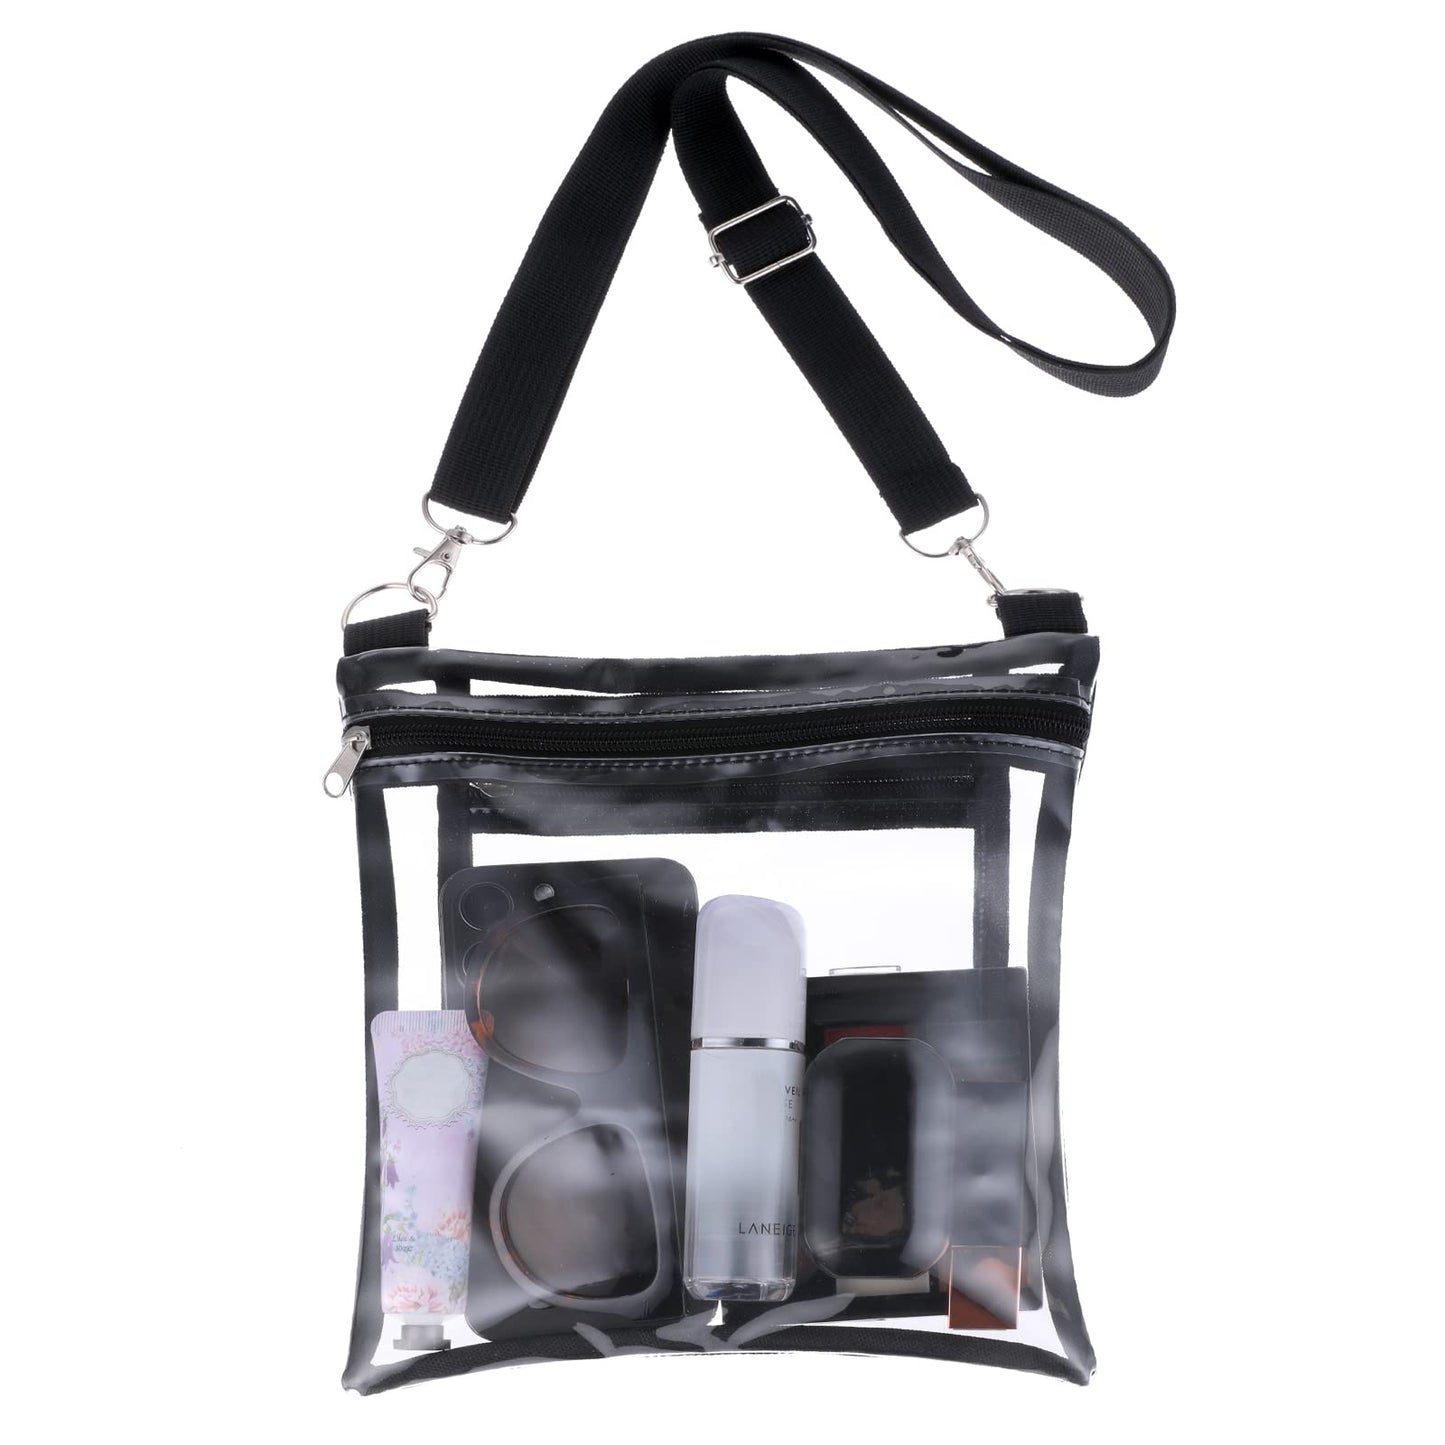 WLLHYF Clear Bag Portable Waterproof Travel Clear Purse Messenger Handbag with Zipper Handle Multipurpose Large Clear Crossbody Bags for Women Men, Clear